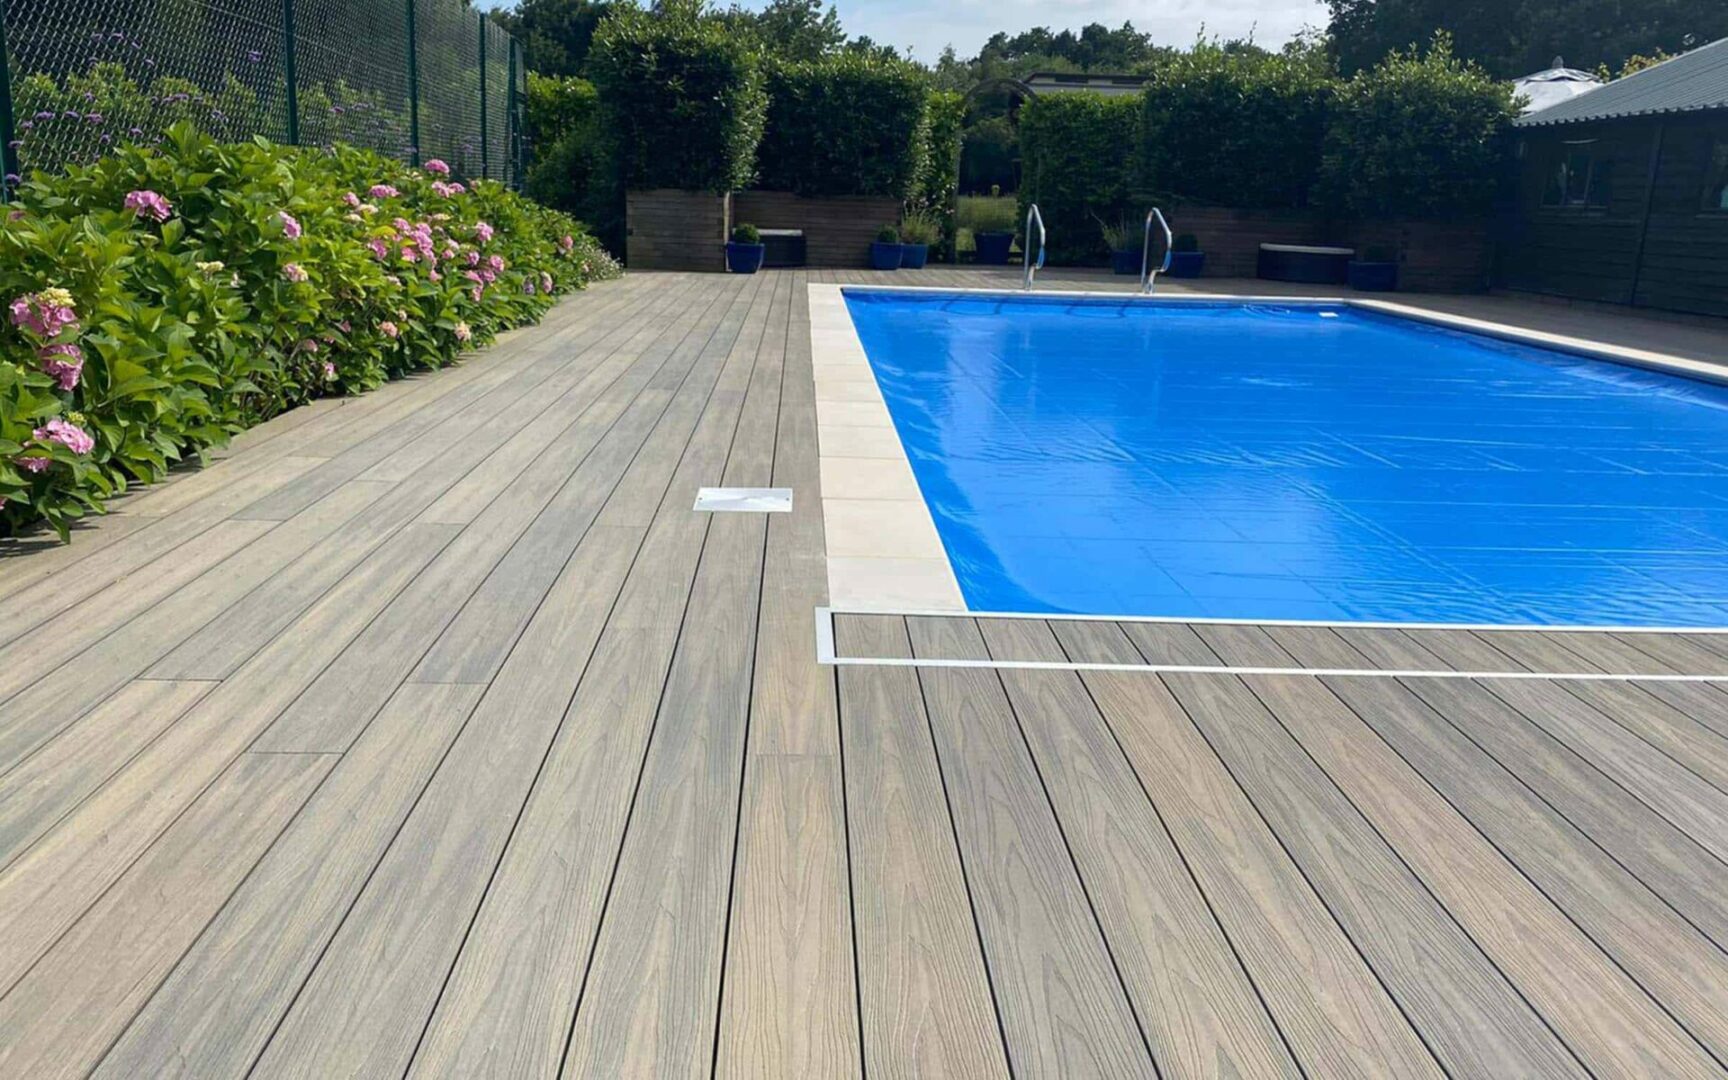 Can I build composite decking around a pool?